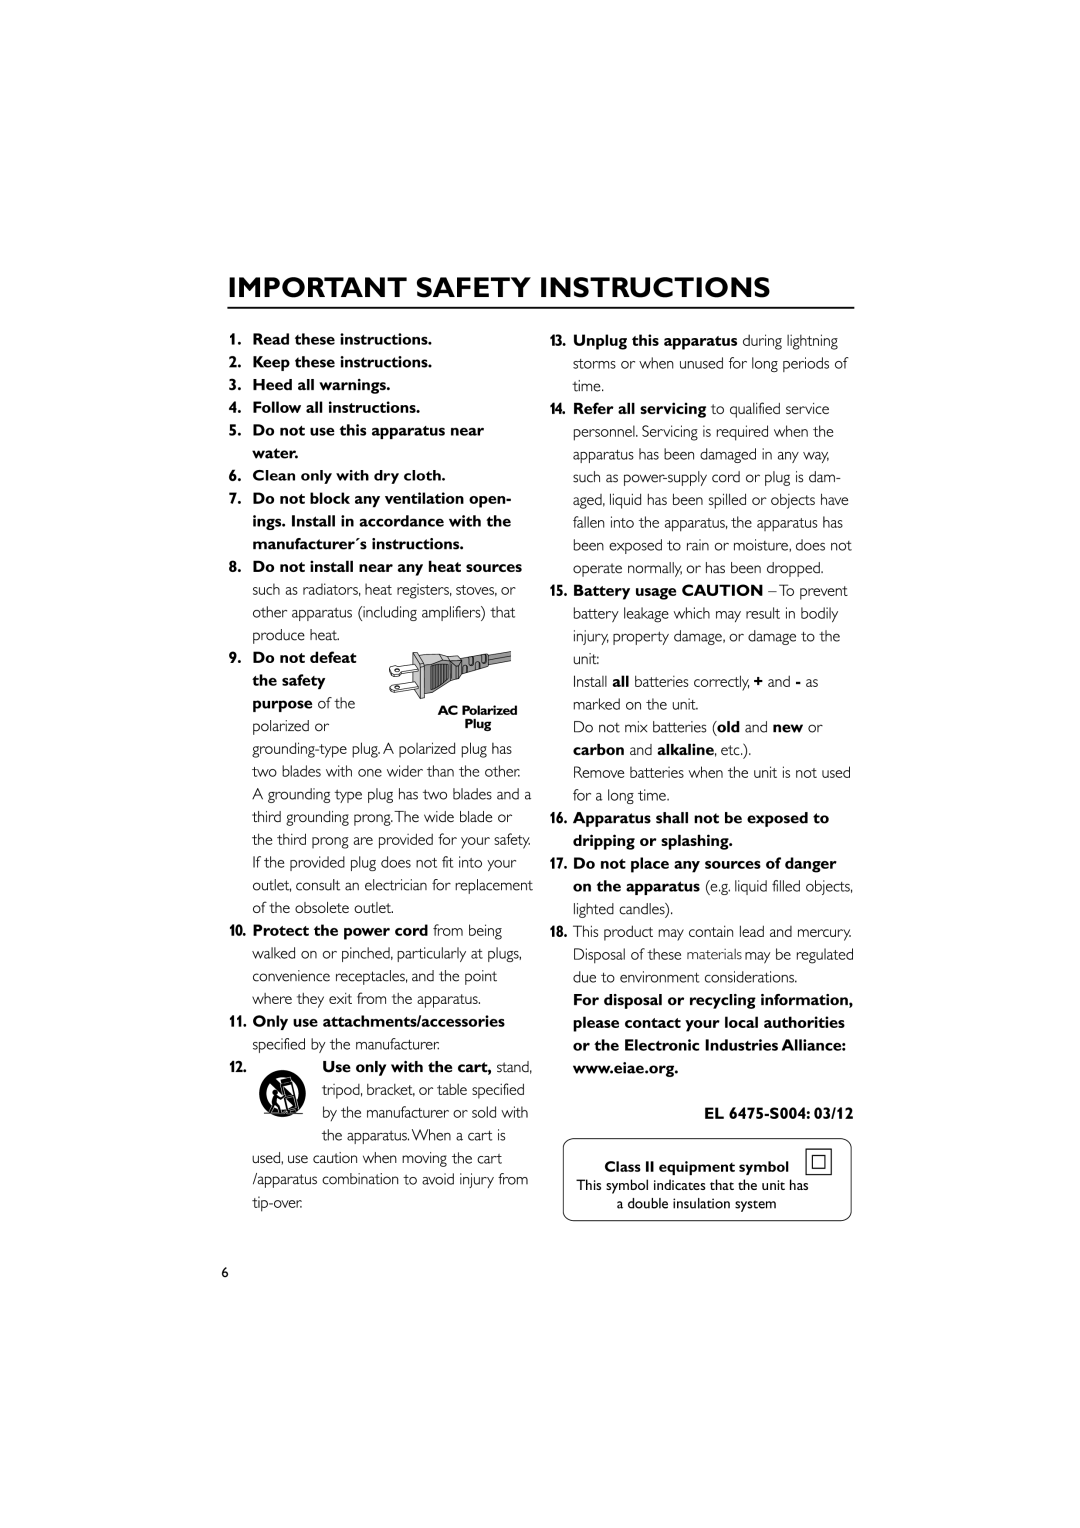 Philips M298 owner manual Important Safety Instructions, Clean only with dry cloth, Class II equipment symbol 